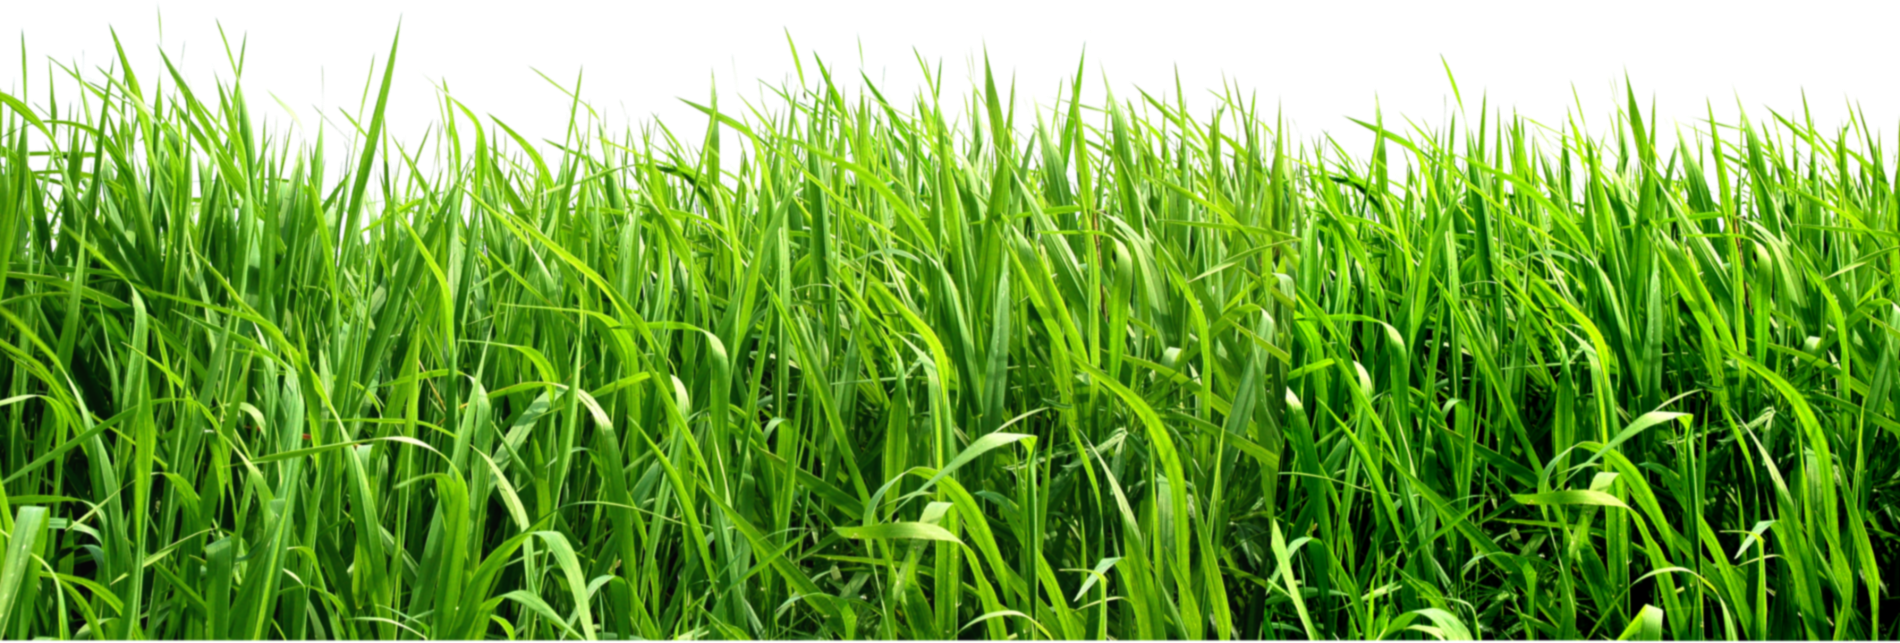 grass png image, green pictur